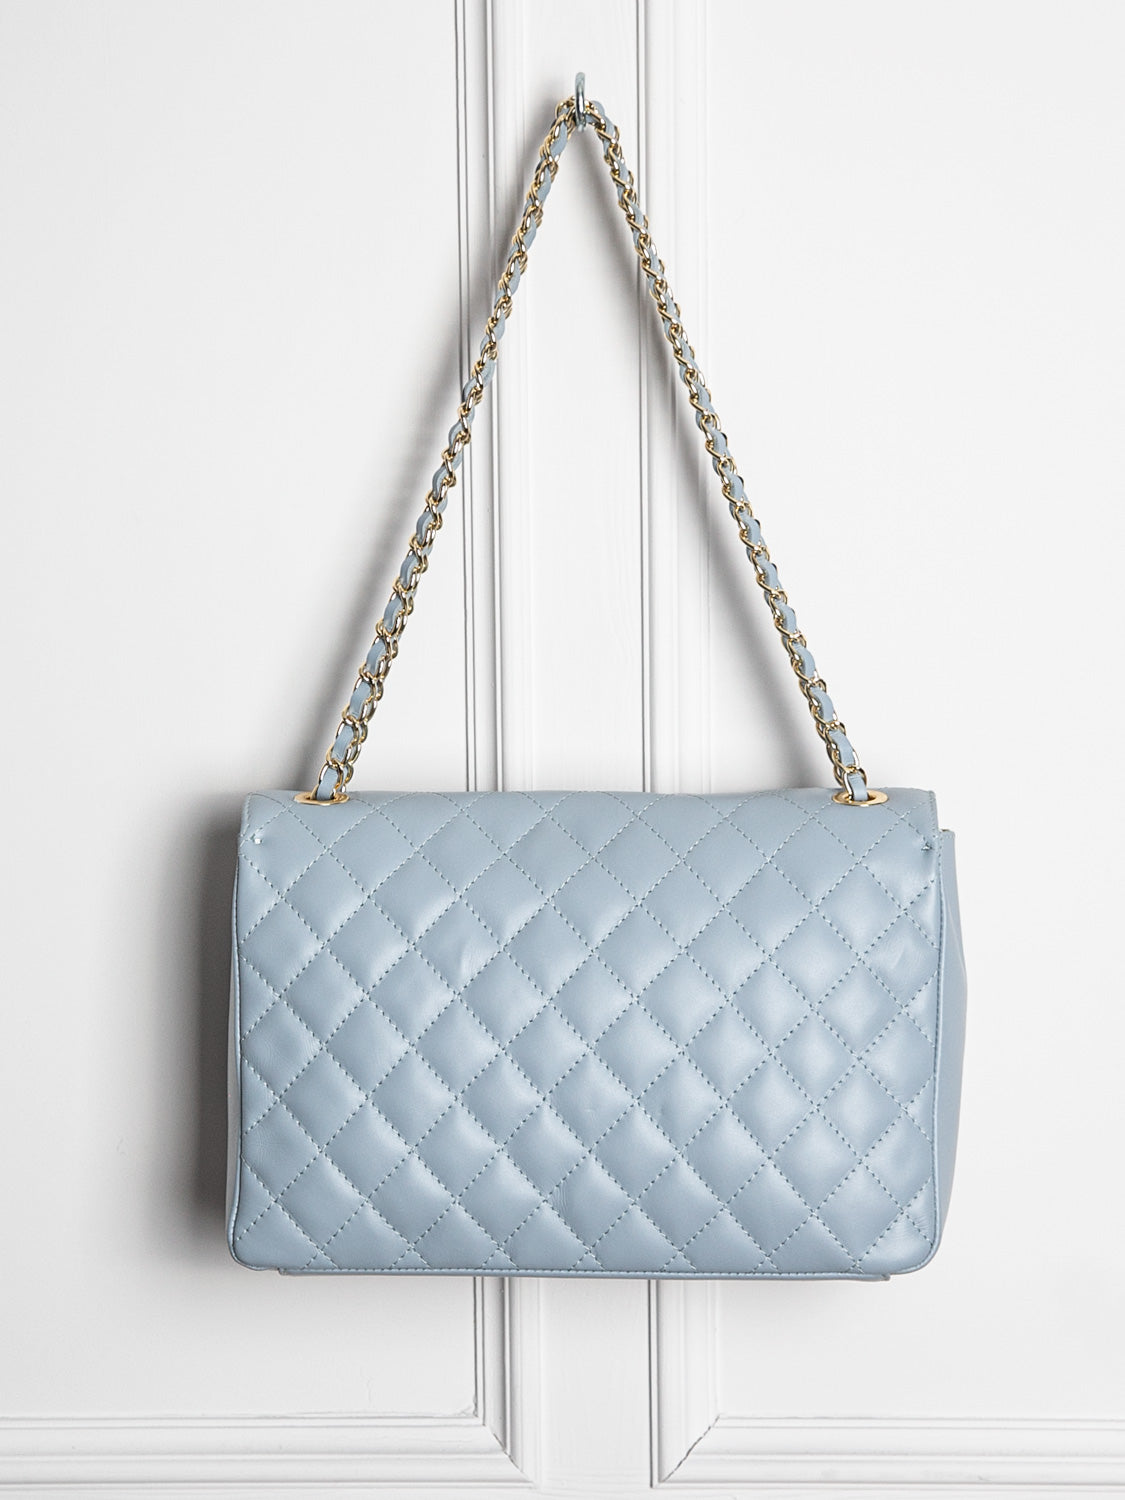 Quilted leather bag with gold details